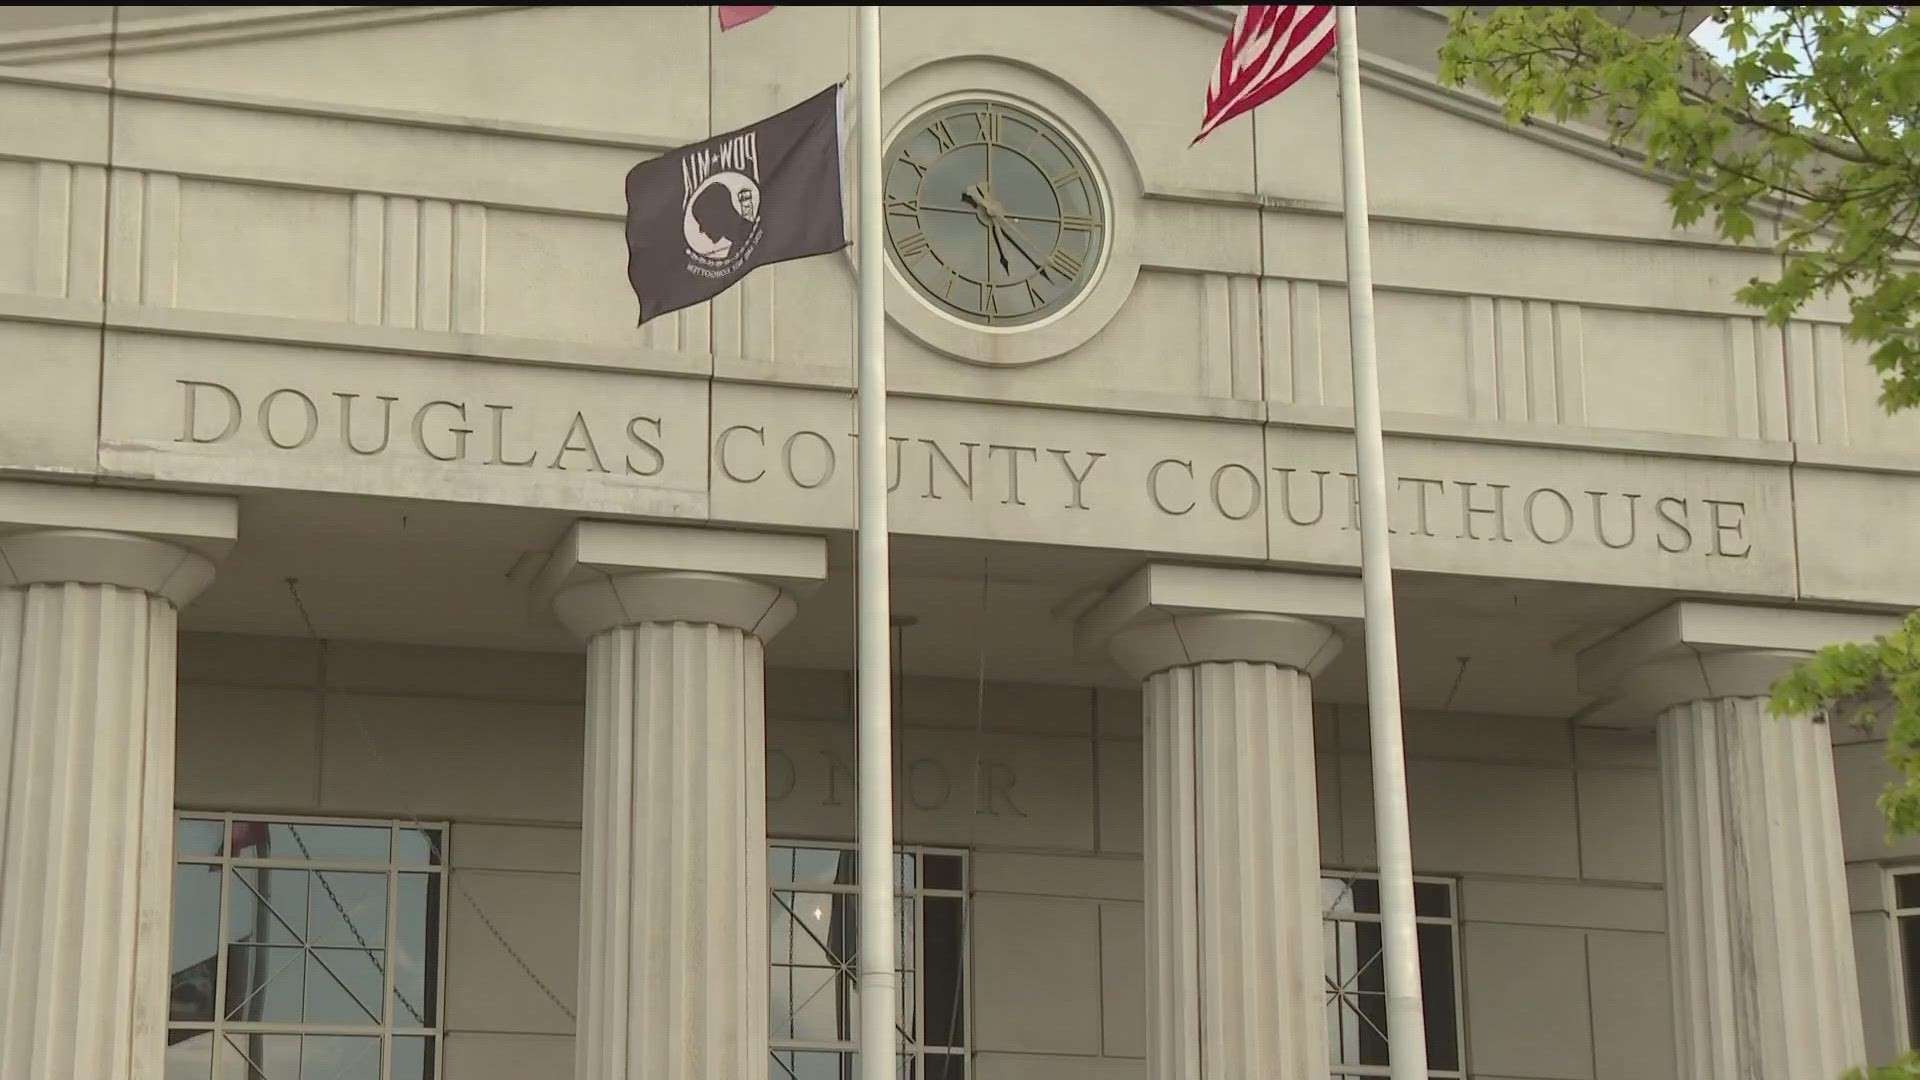 The Douglas County Probate Court opens its doors one Saturday every quarter to help residents who can't get there during the work-week. But that may be in jeopardy.